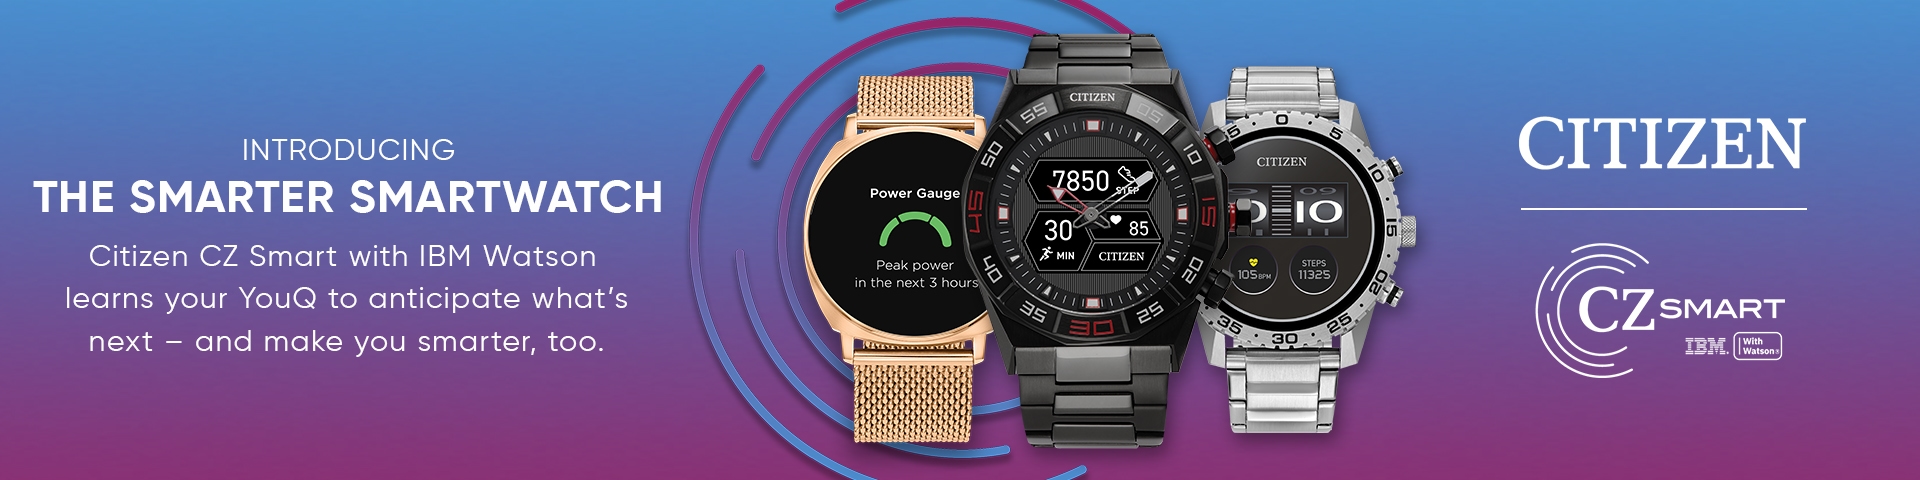 Introducing the smarter smartwatch. Citizen CZ smart with IBM Watson learns your YouQ to anticipate what's next